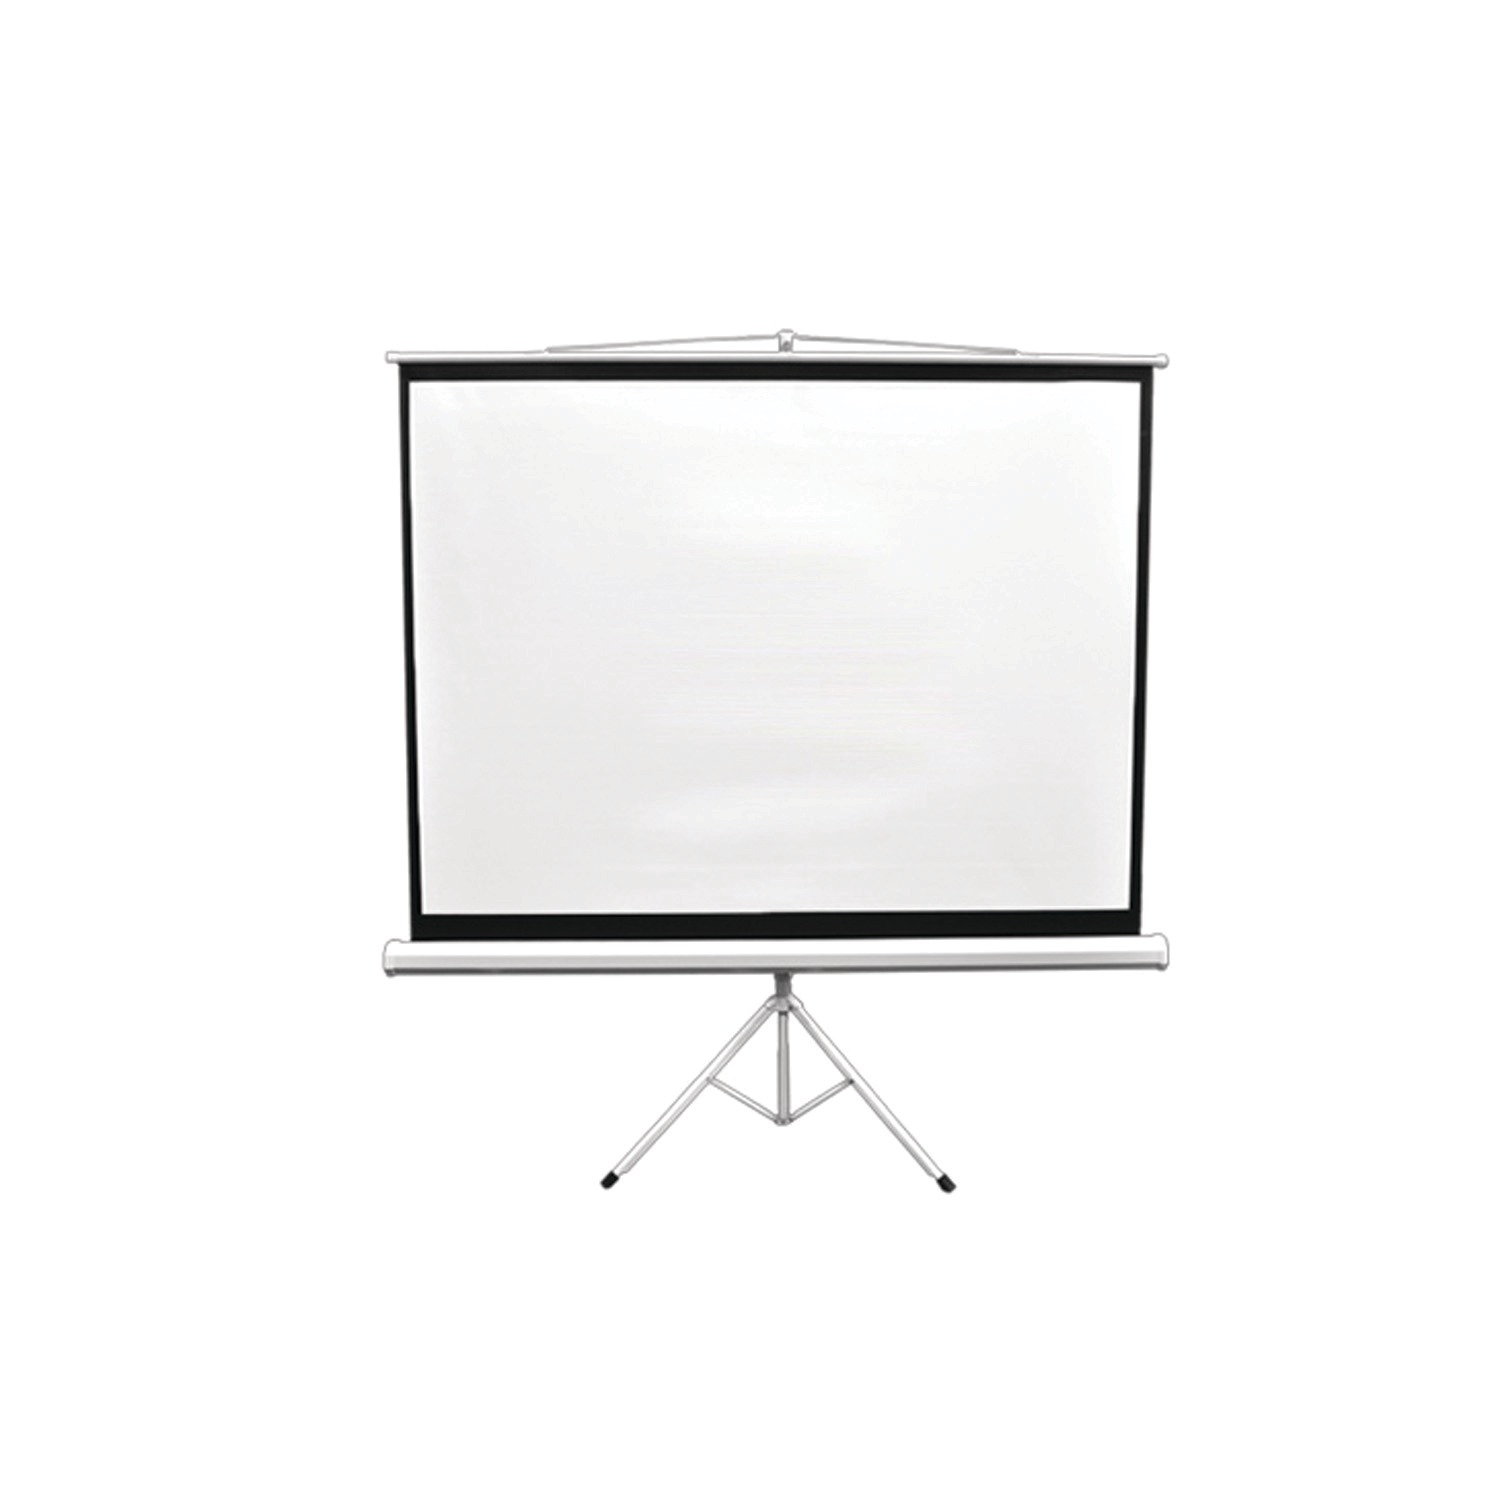 Pyle® Floor-standing Portable Tr Manual Projector Screen (84-inch) - image 2 of 5